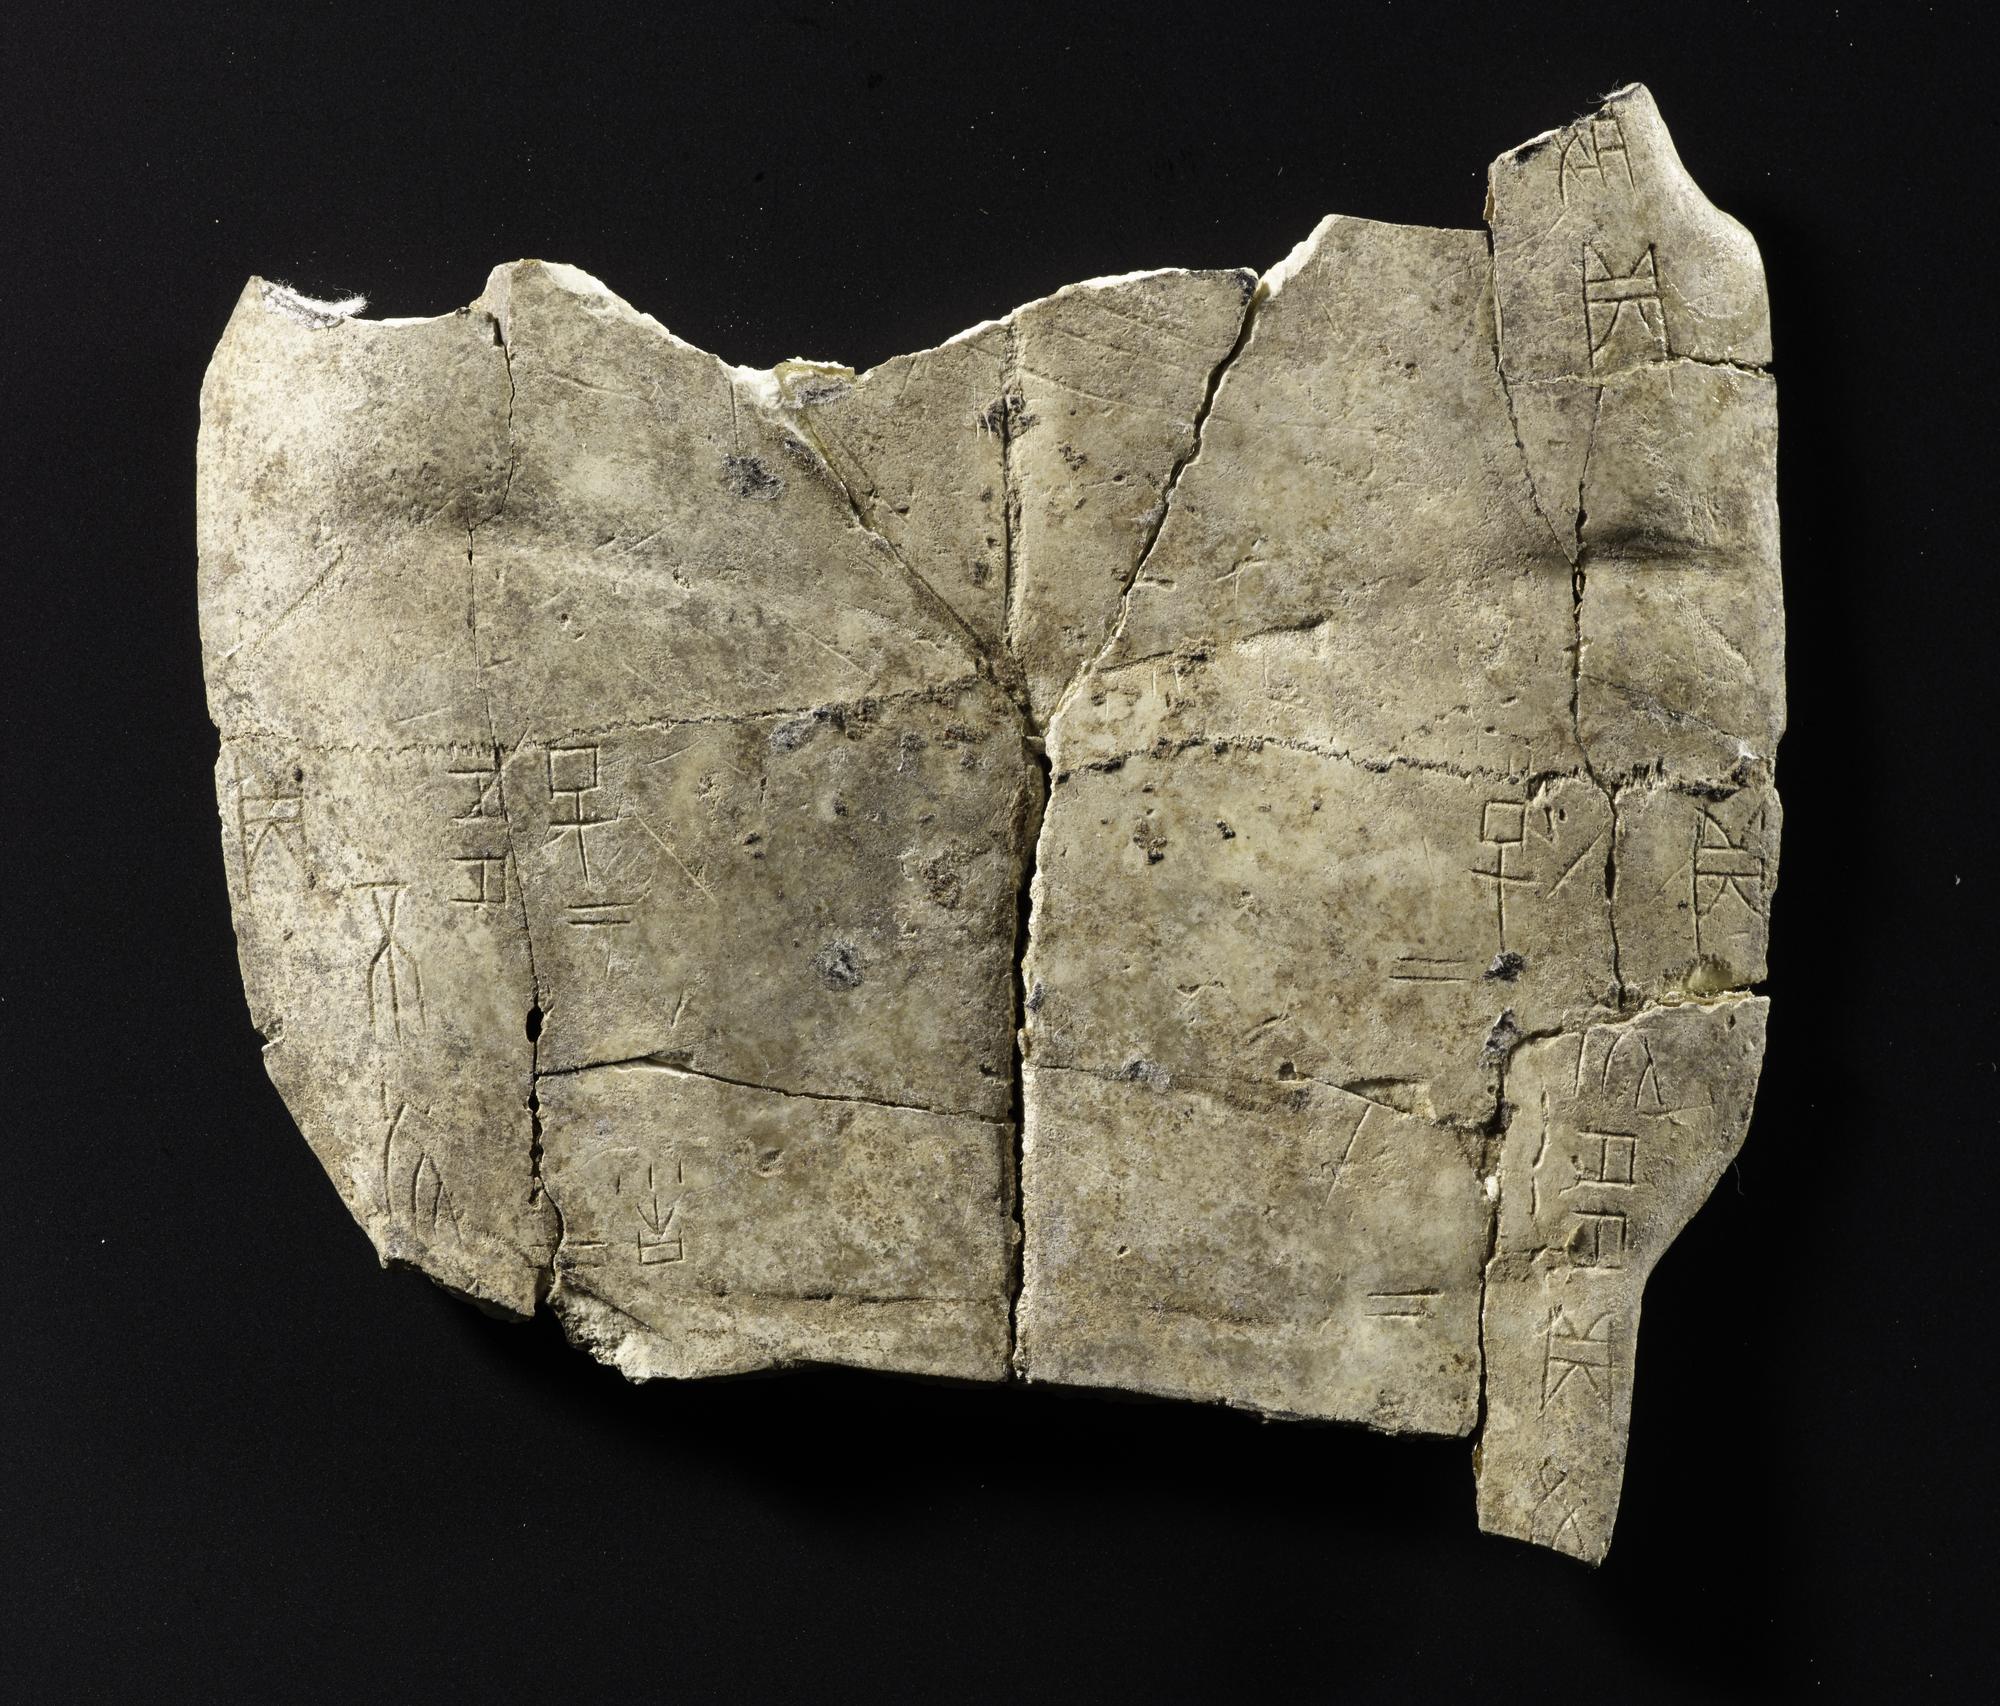 •	Oracle bone of tortoise plastron or ox scapula, with incised script recording divination: China, Henan Province, near Anyang, Yinxu, late Shang dynasty, c. 1200-1050 BC.